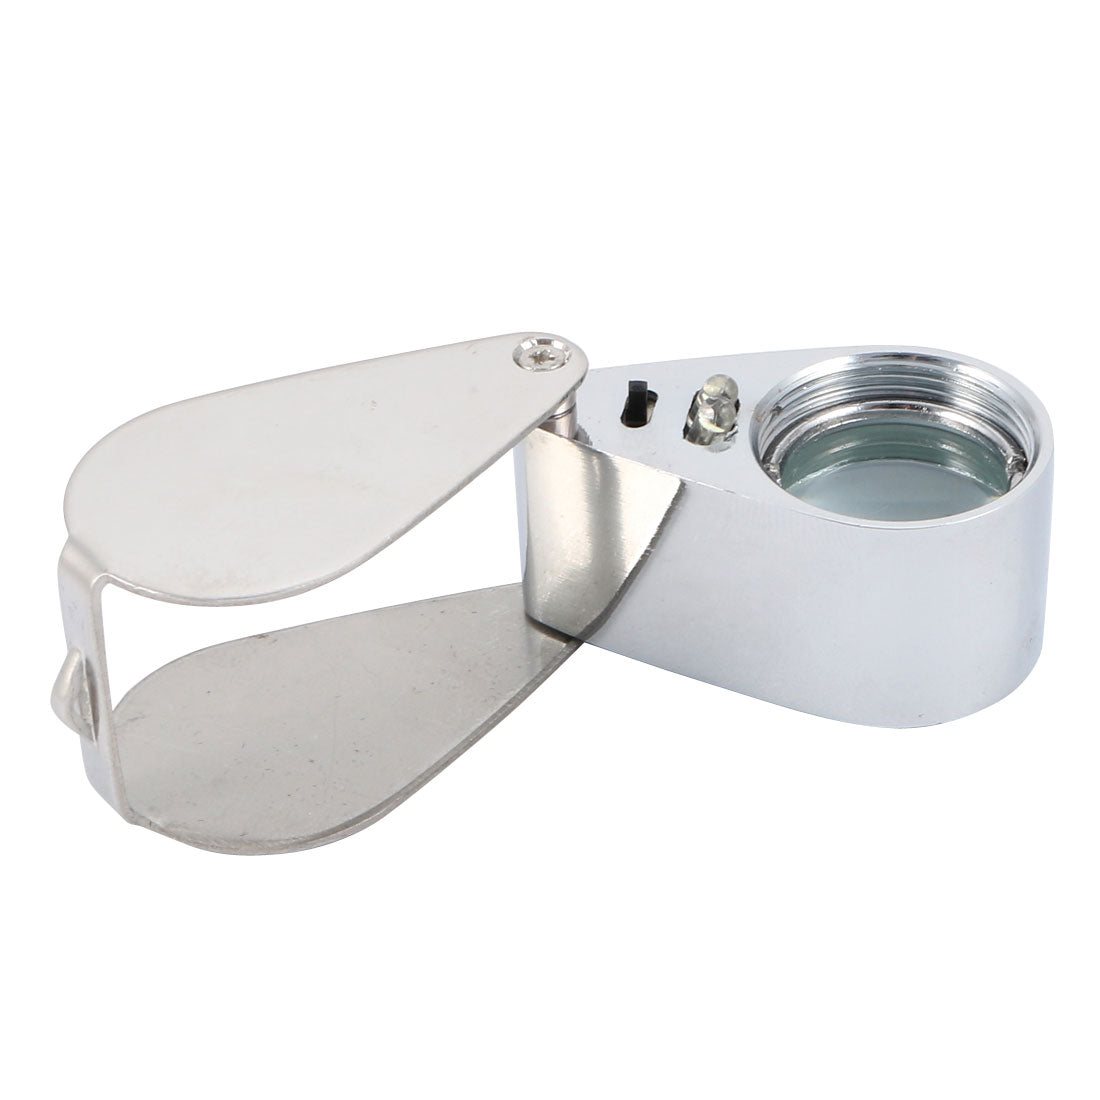 uxcell Uxcell Mini Portable Folding Loupe Metal Magnifier Magnifying Eye Glass Lens 30X w LED Light